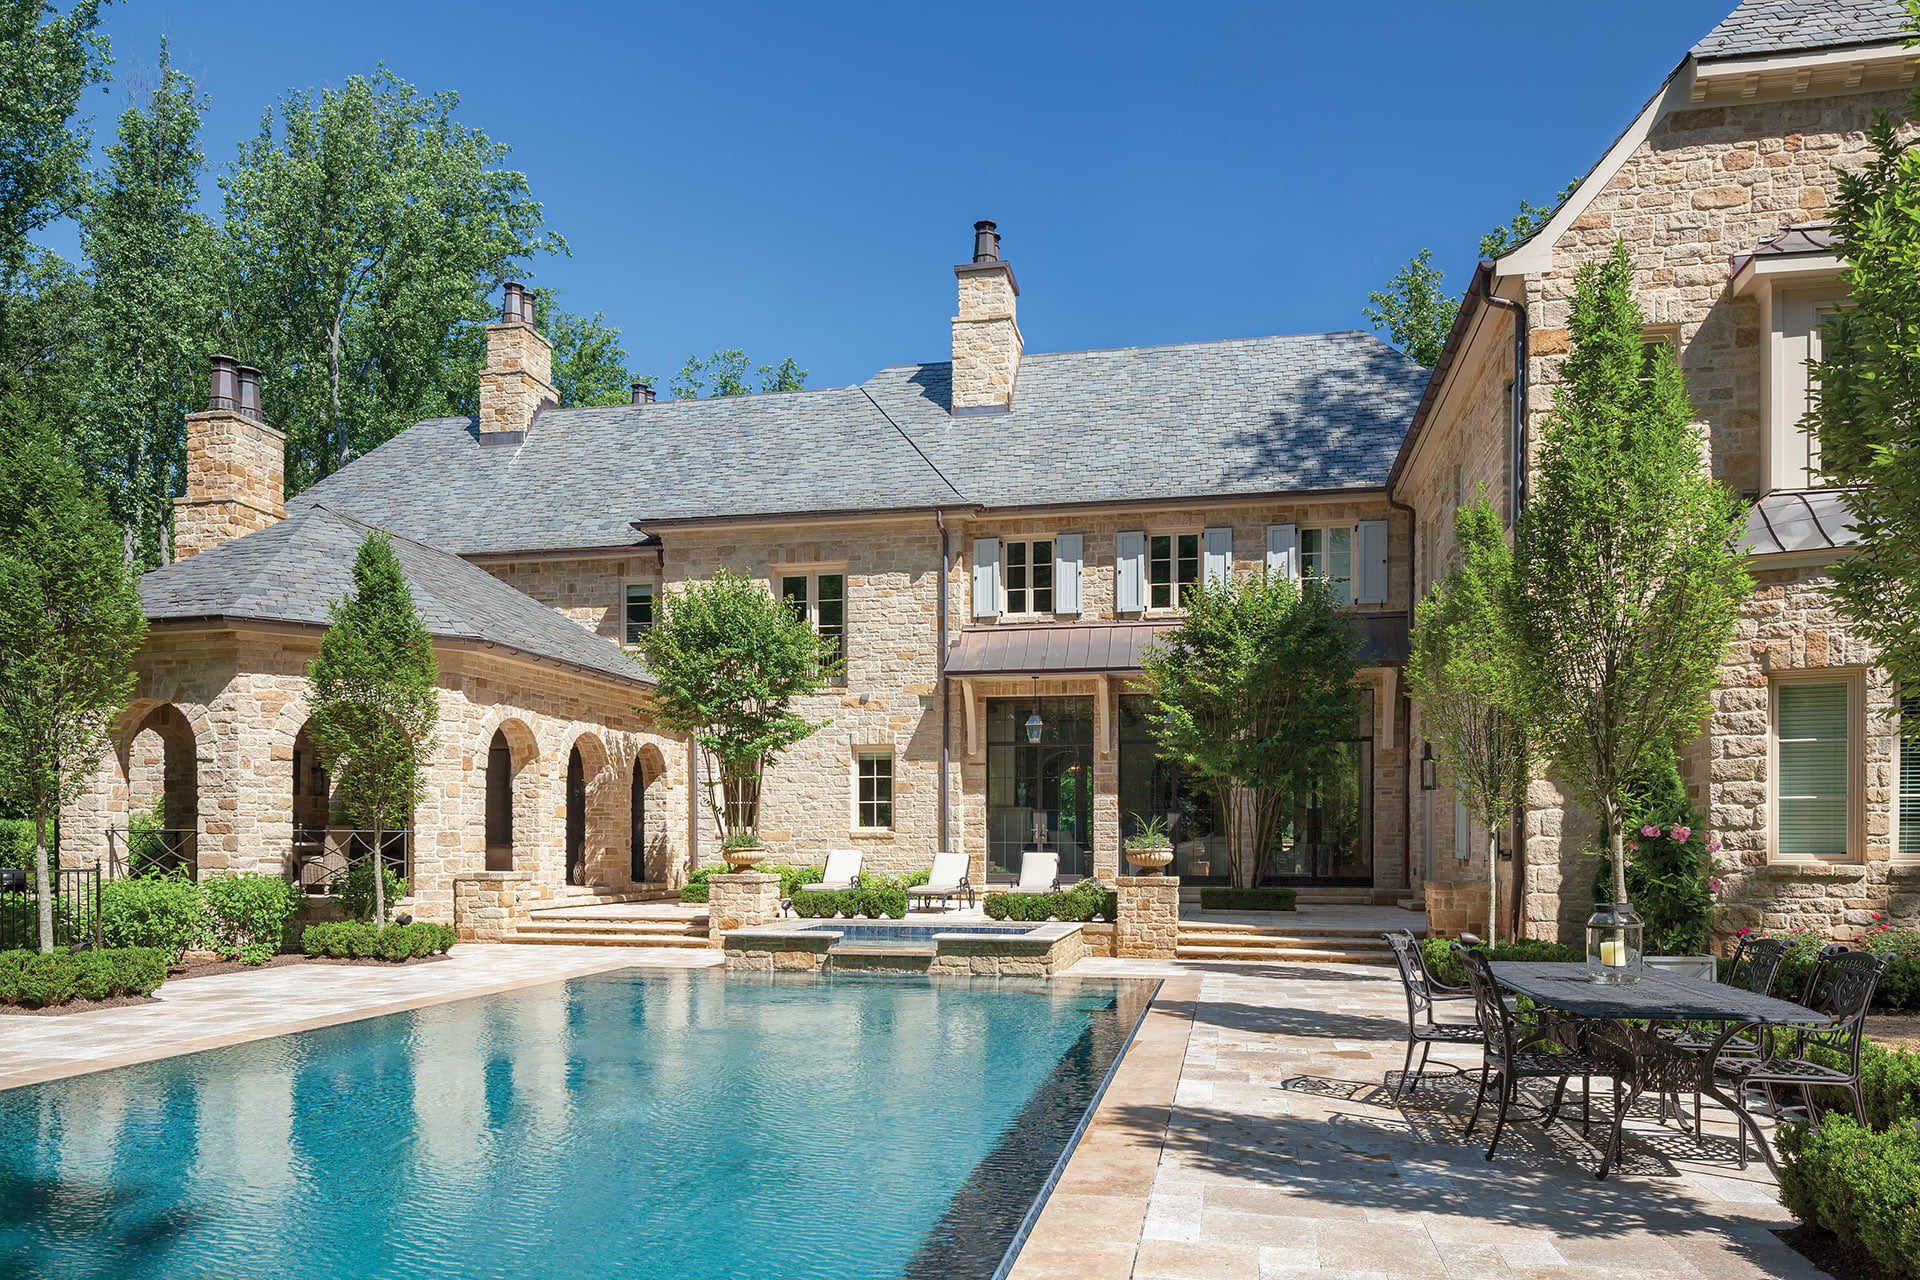 Travertine pool deck is enveloped by boxwood, crape myrtle and European hornbeam trees.